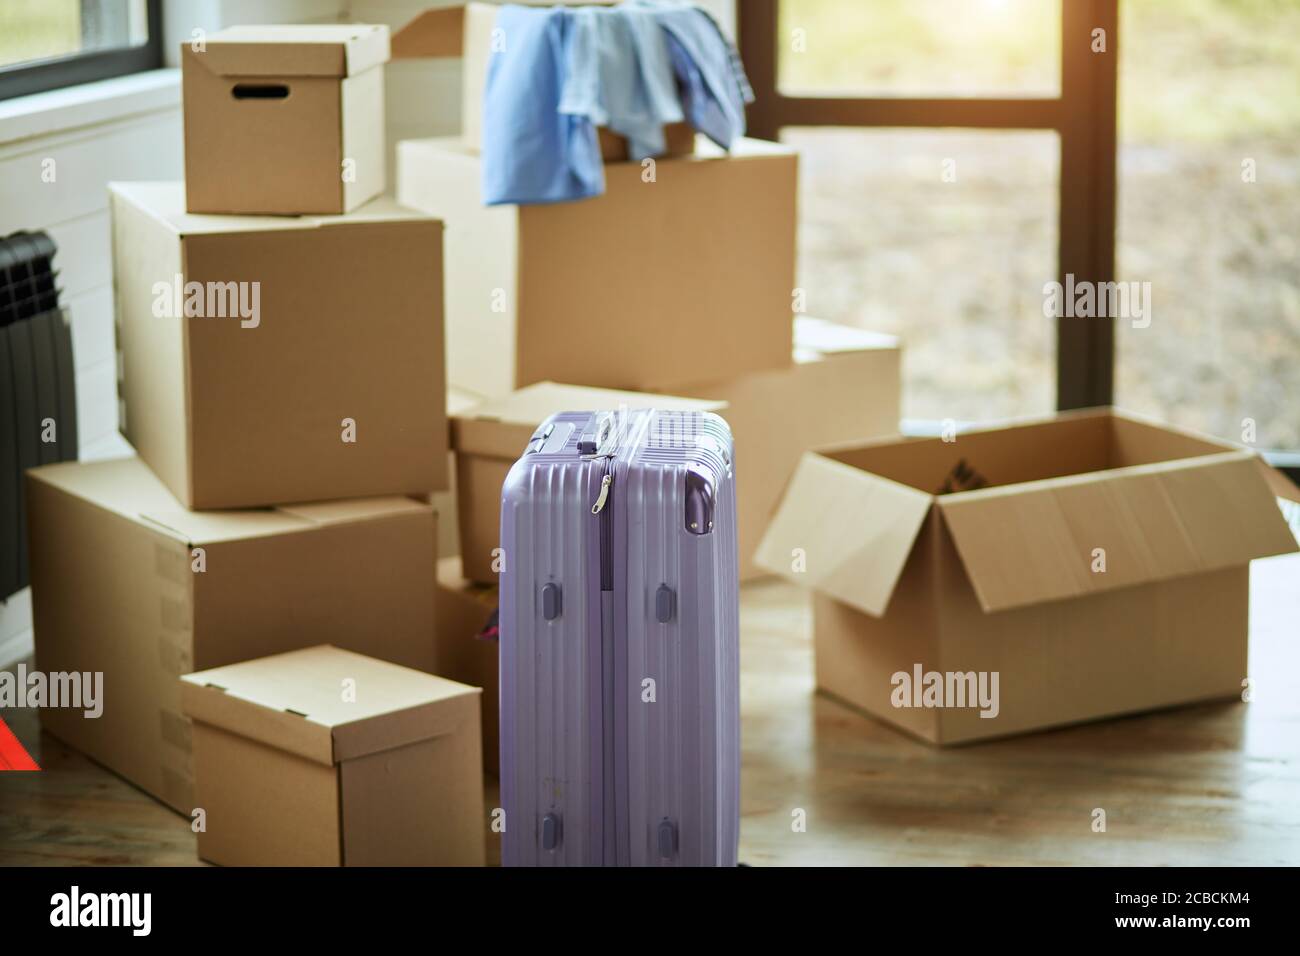 Packed Household Goods Image & Photo (Free Trial)